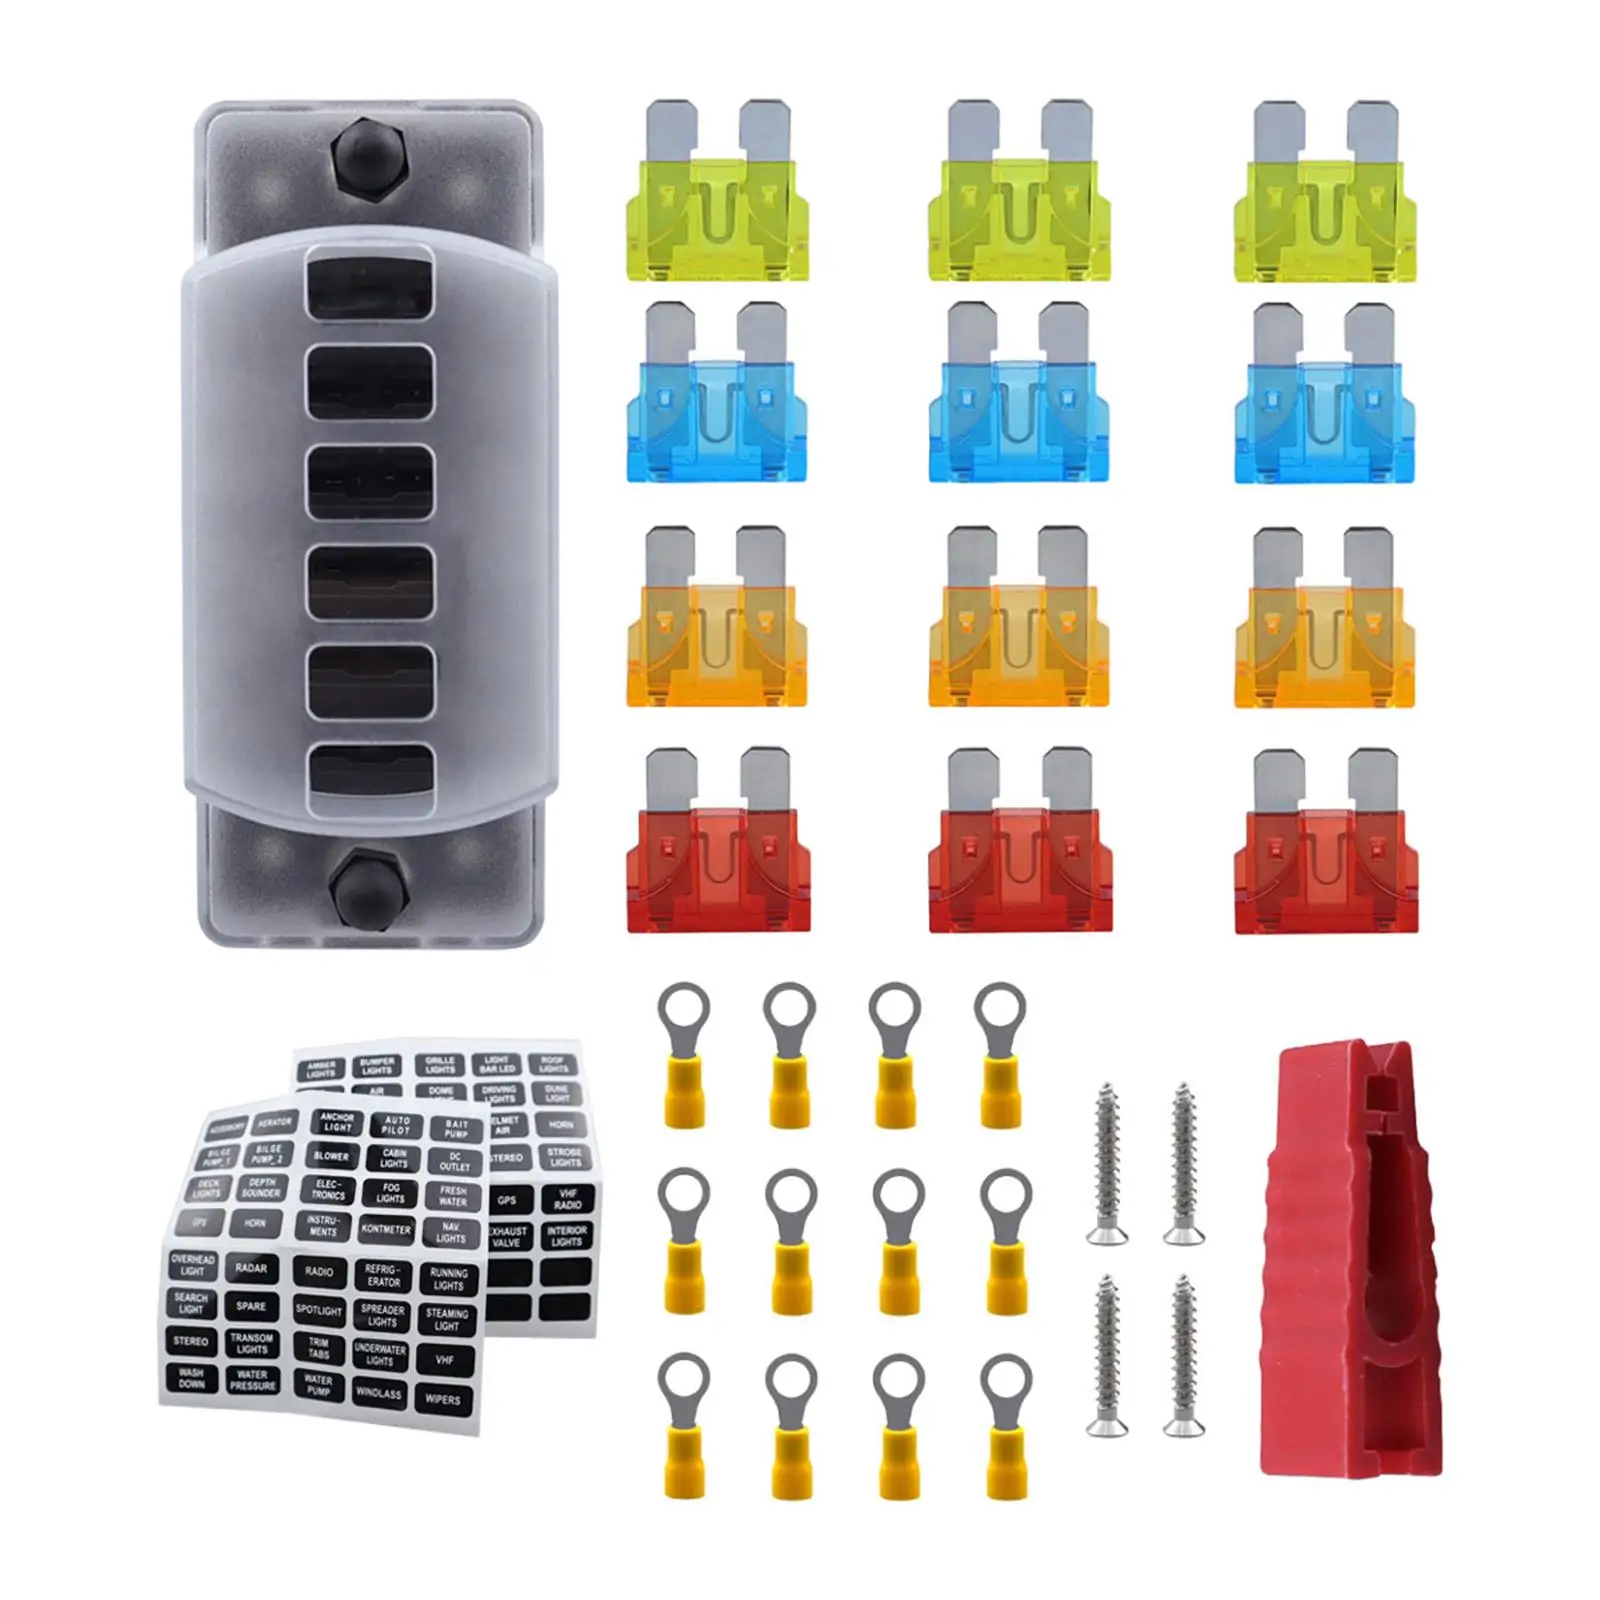 6 Way Fuse Block Waterproof Protection Cover Fuse Box for RV Car Yacht